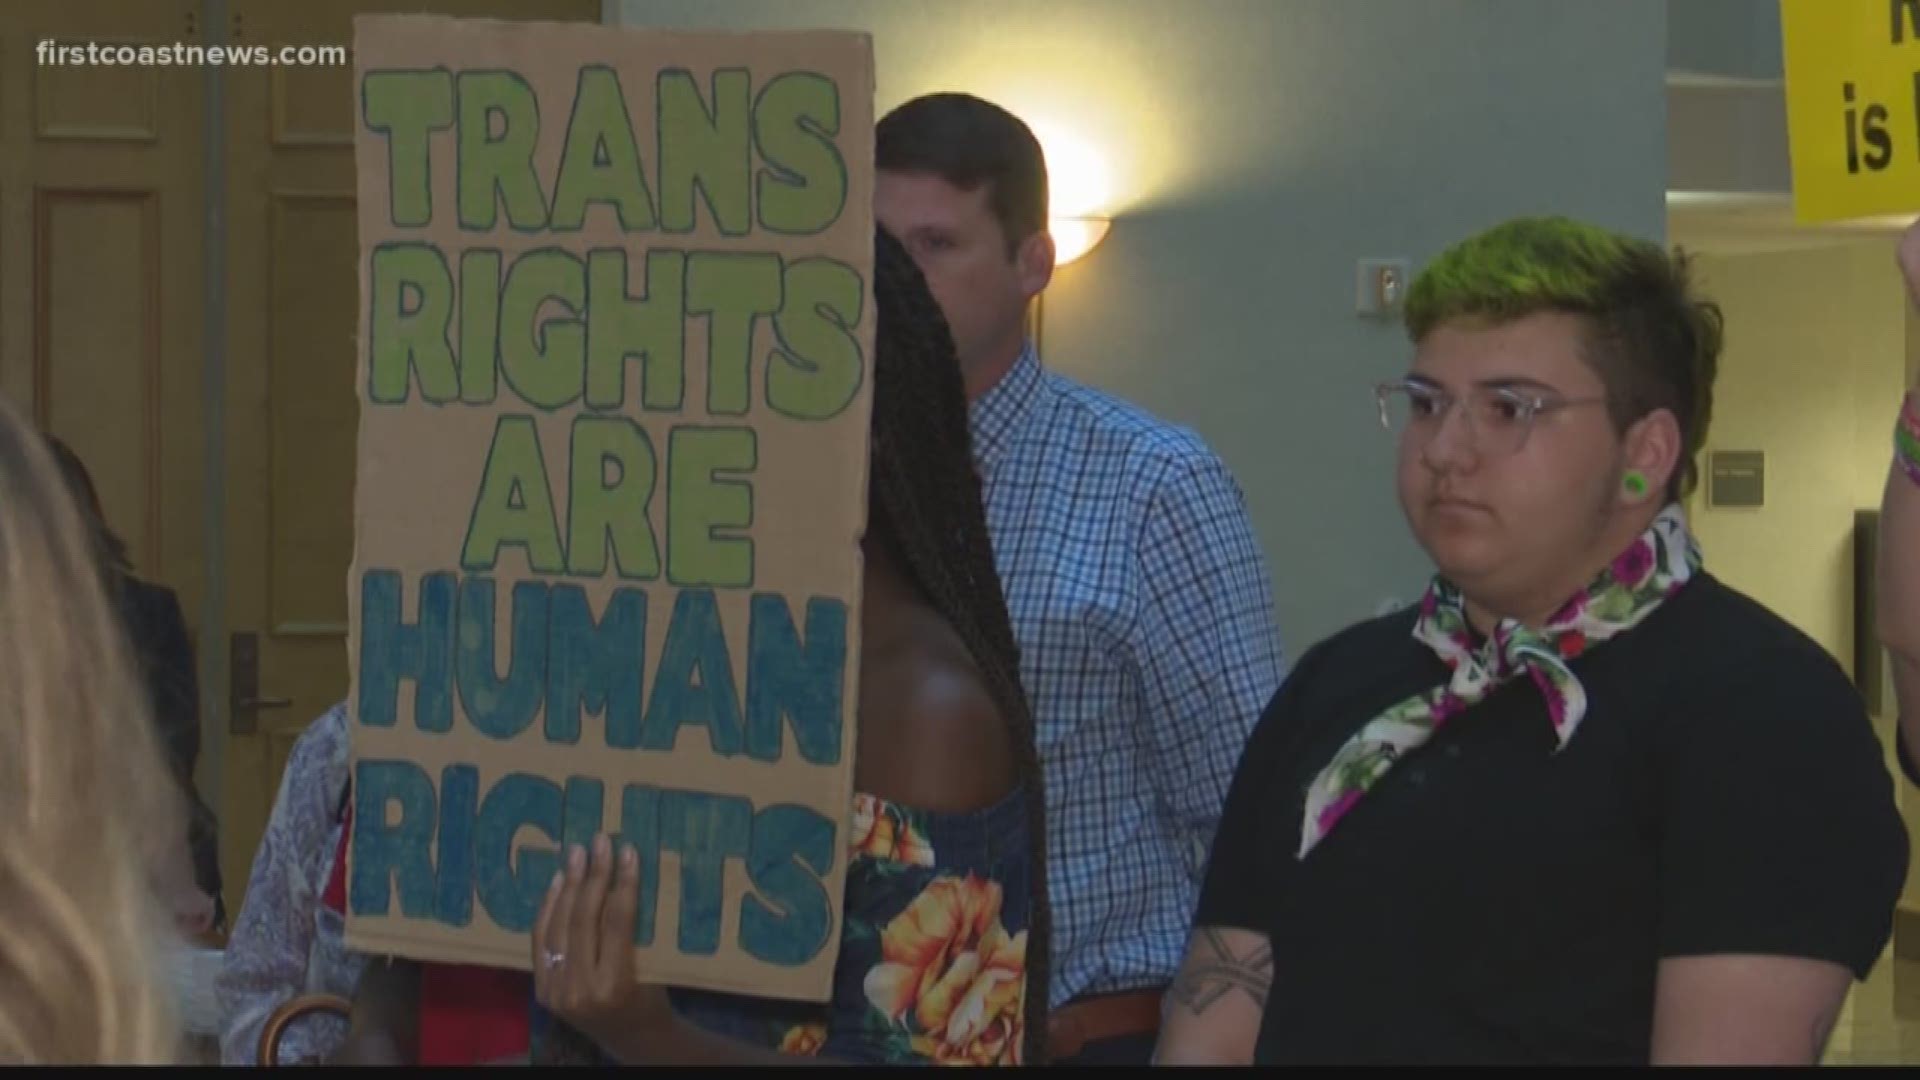 People are gathering Tuesday to remember the transgender people who were tragically killed in Jacksonville in 2018.